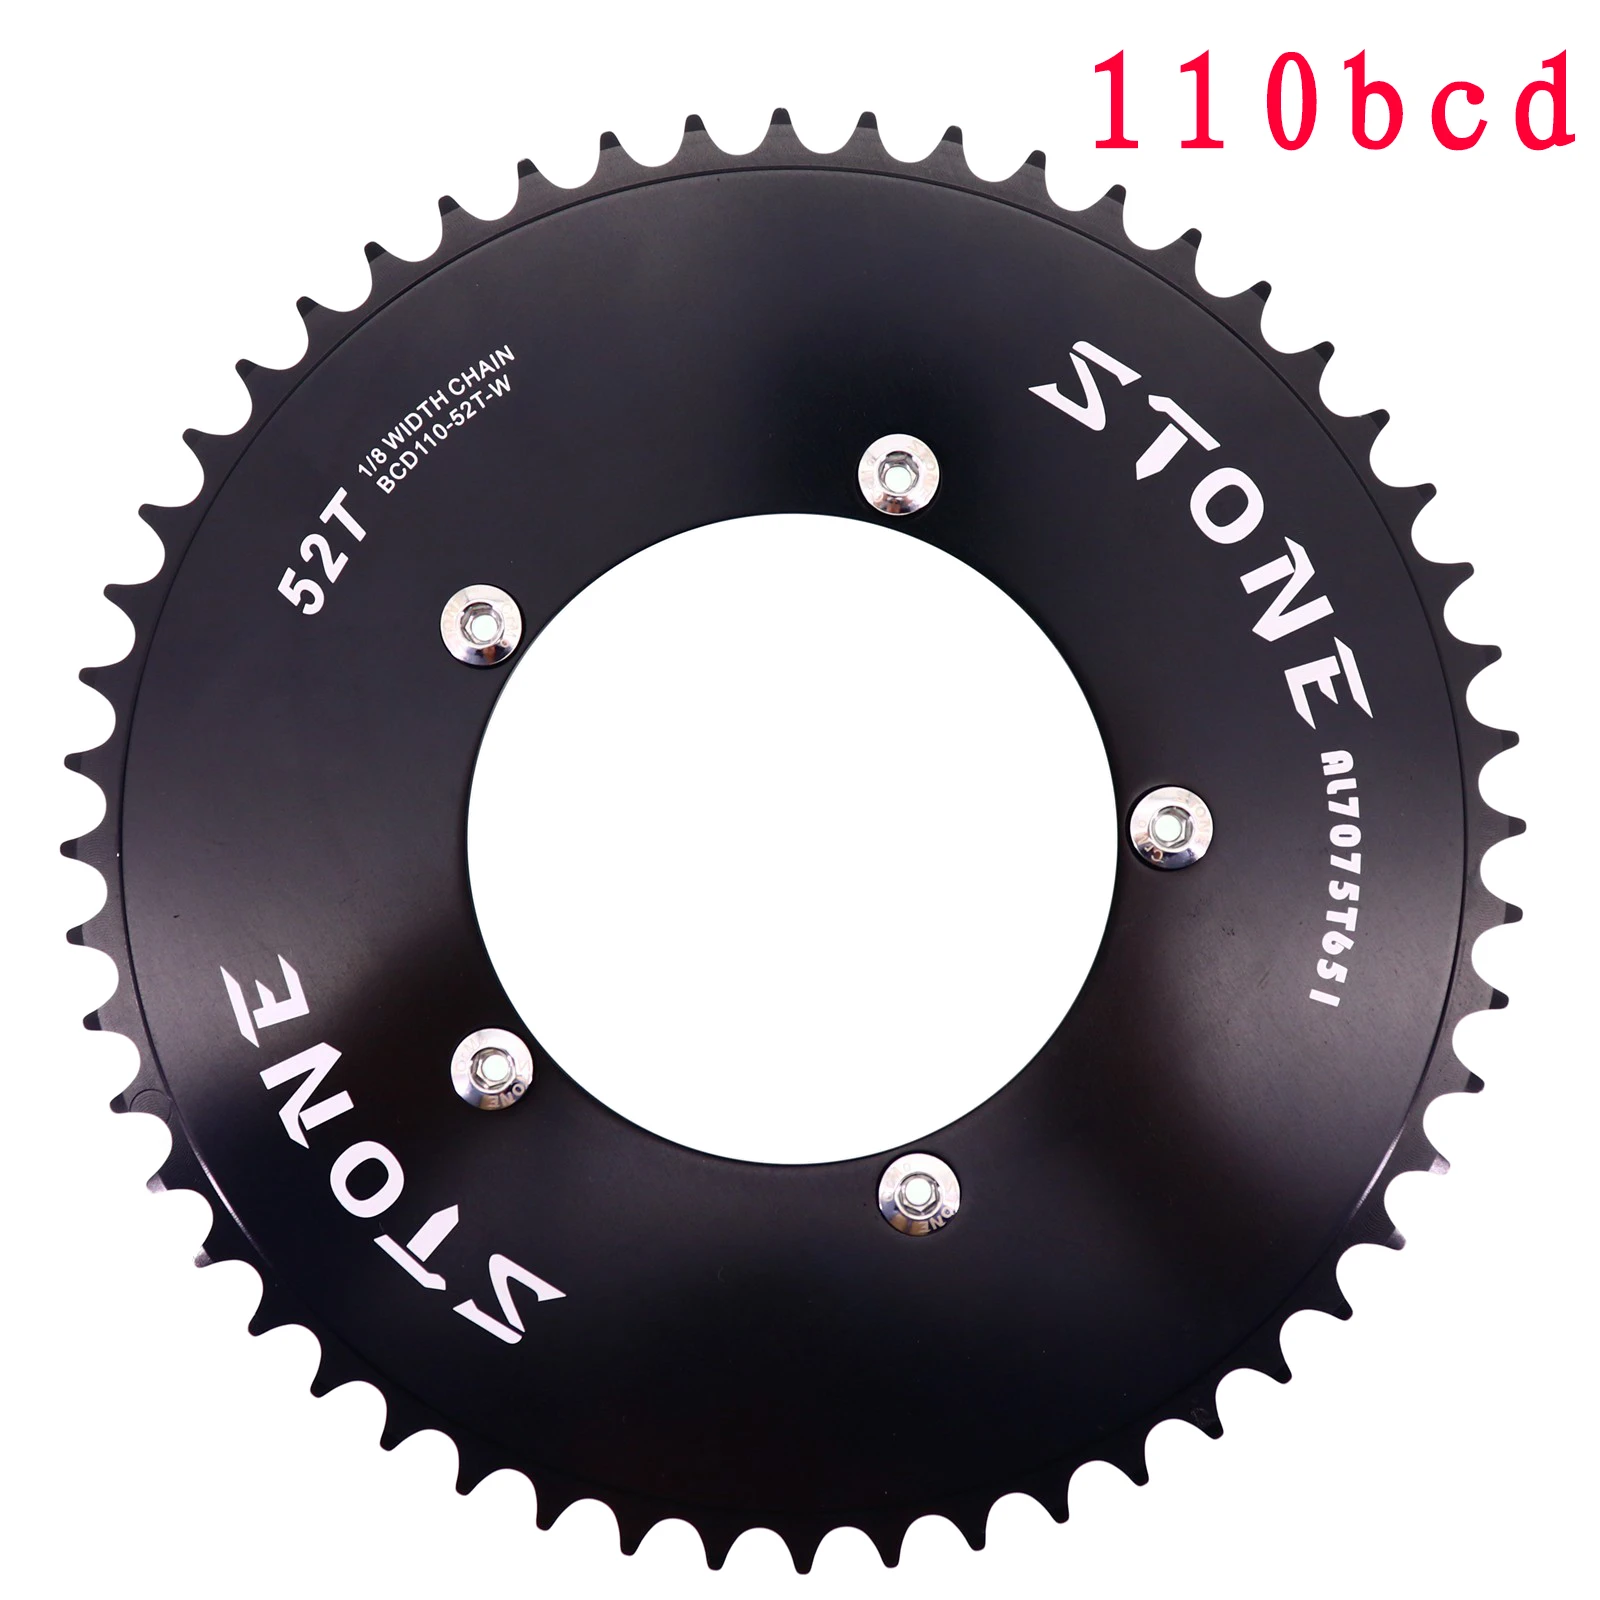 Stone 110 BCD round chainring aero fixed gear track bike fixie single speed 42T 46T 48T 50T 52t 54 57T 58t 59T 60t  tooth 110bcd